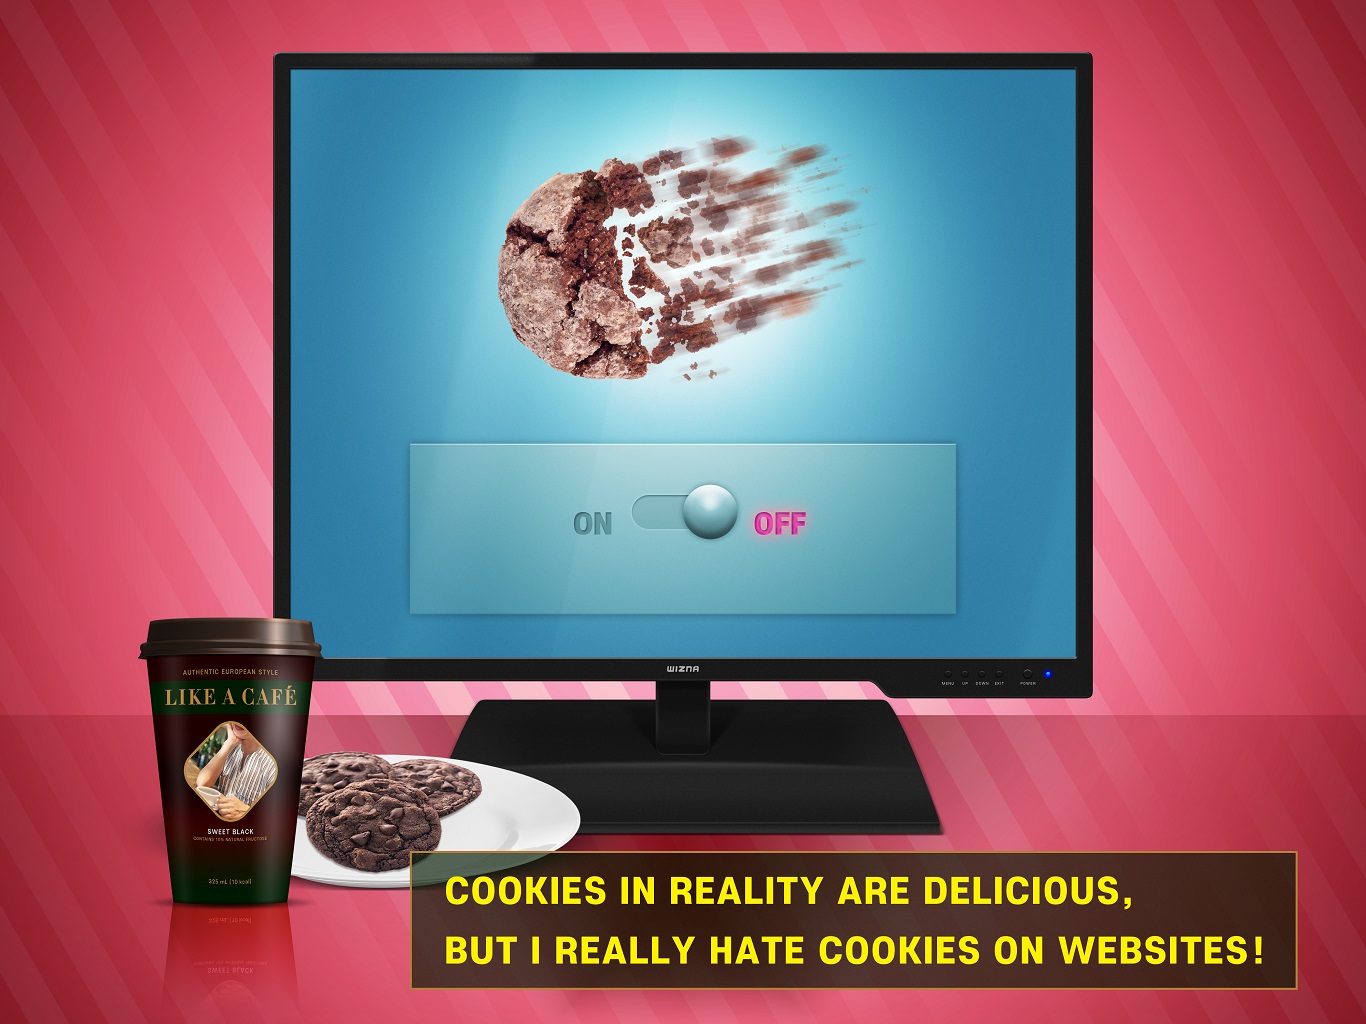 multimedia - On Off Authentic European Style Wizna Pove A Caf Sweet Black Cms Mt Fauce 952 T Idoni Cookies In Reality Are Delicious, But I Really Hate Cookies On Websites! Bmeel Bevck